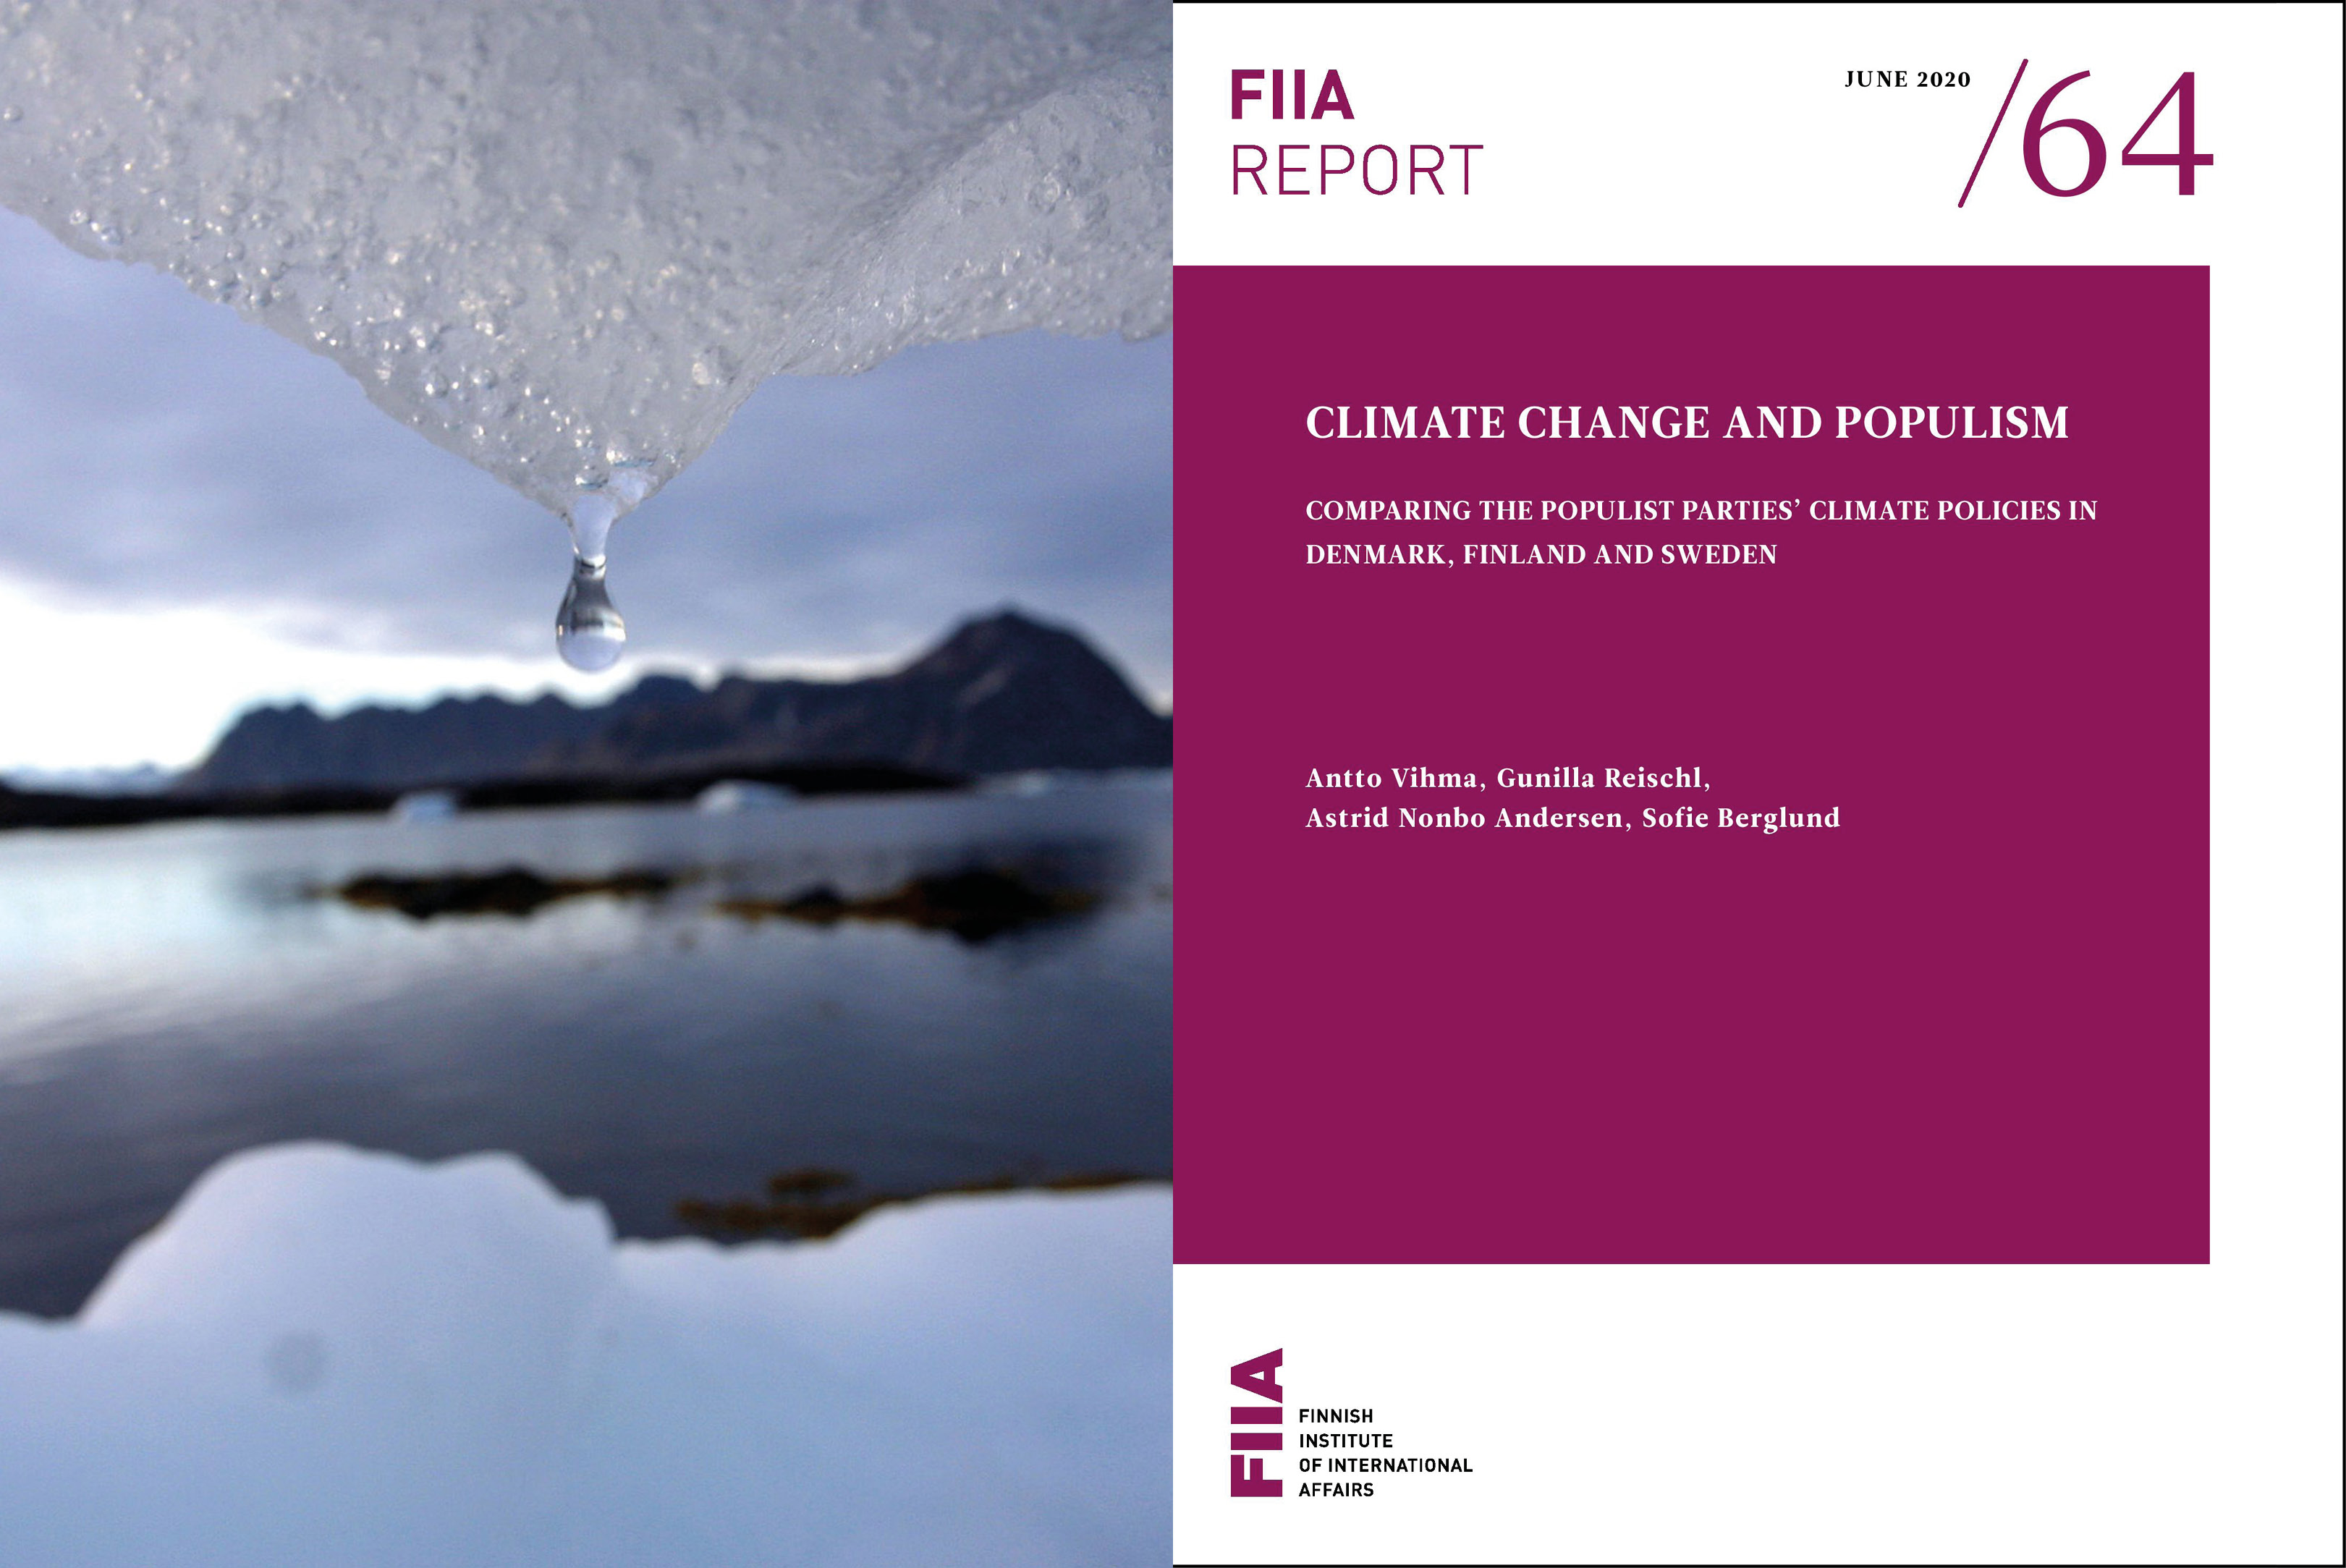 New Report: Climate Change and Populism: Comparing the populist parties’ climate policies in Denmark, Finland and Sweden